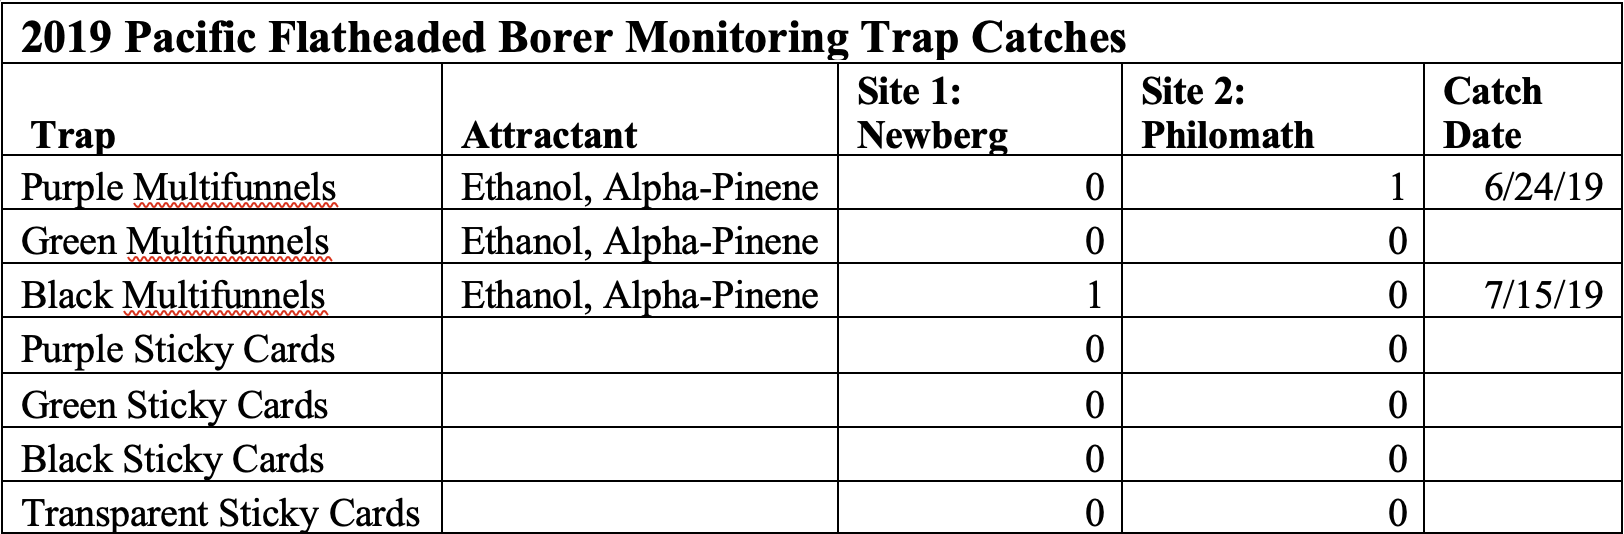 Monitoring trap catches 2019 Commercially available 12-unit Lindgren multiple funnel traps coated in fluon (Chemtica, Santo Domingo de Heredia, Costa Rica), and 7x5 inch sticky card traps (Alpha Scents, West Linn, OR) were tested. Two commercially available attractants, Ethanol UHR Lure (Alpha Scents, West Linn, OR) and Alpha-Pinene UHR Lure (Alpha Scents, West Linn, OR) were tested with the 12-unit multiple funnel traps. 